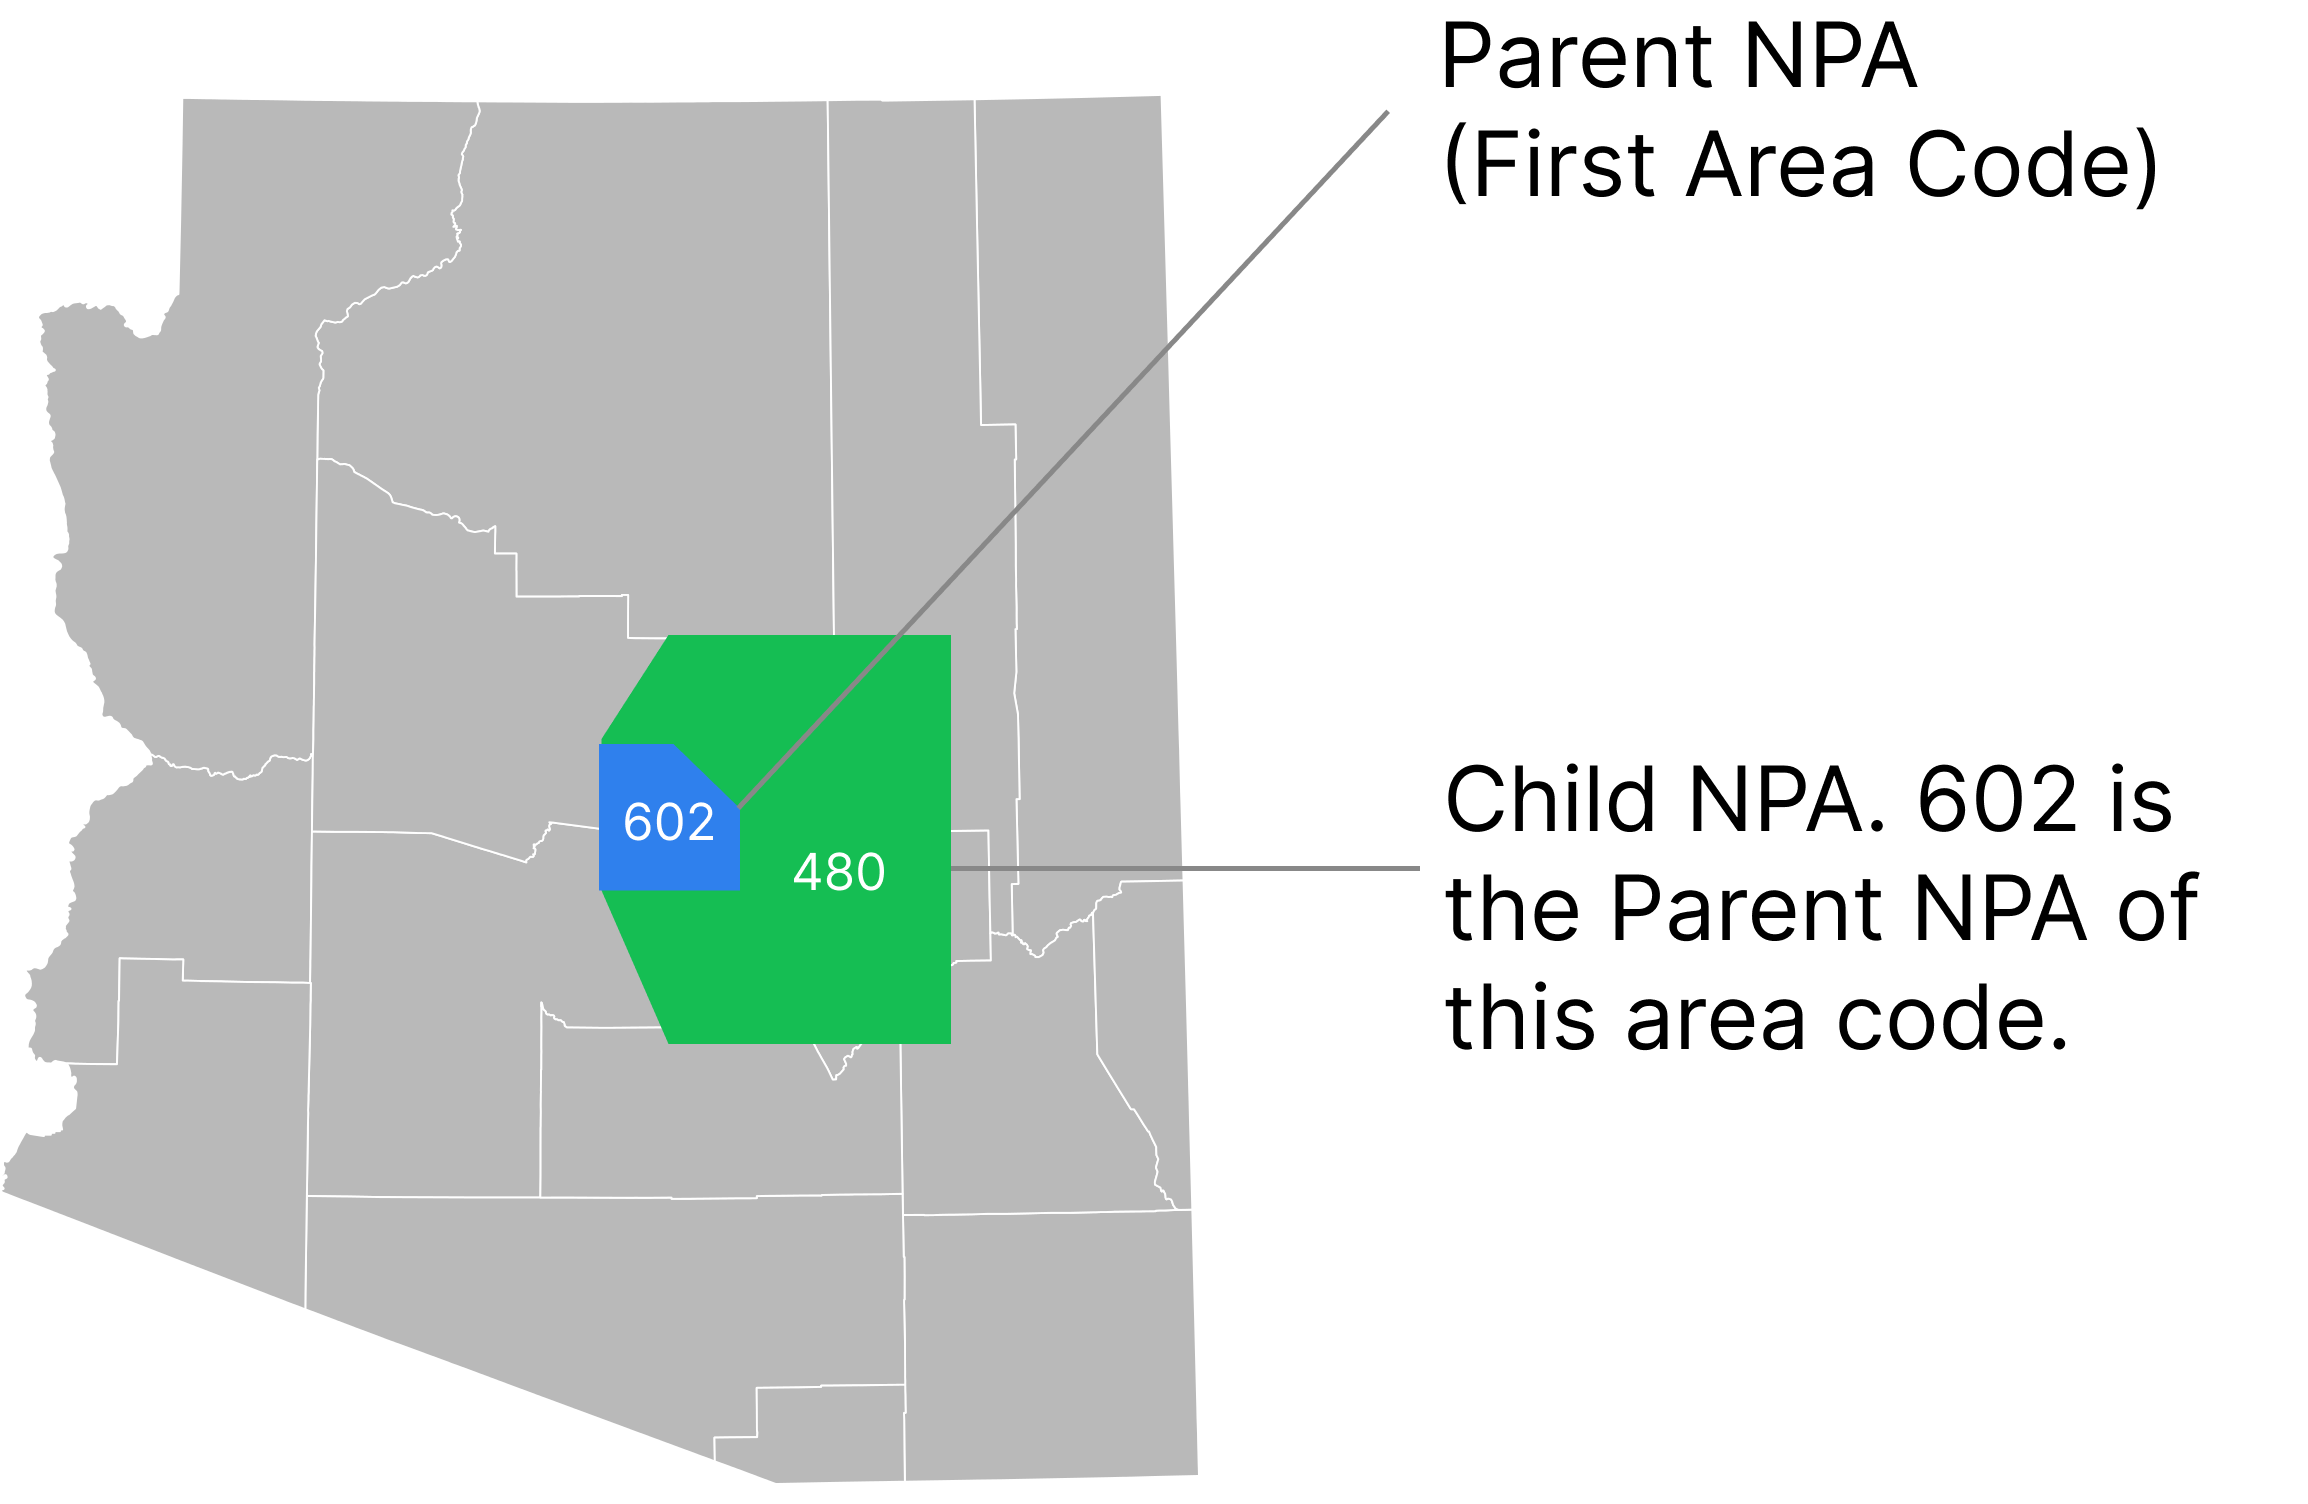 Example of the Parent NPA association between two area codes